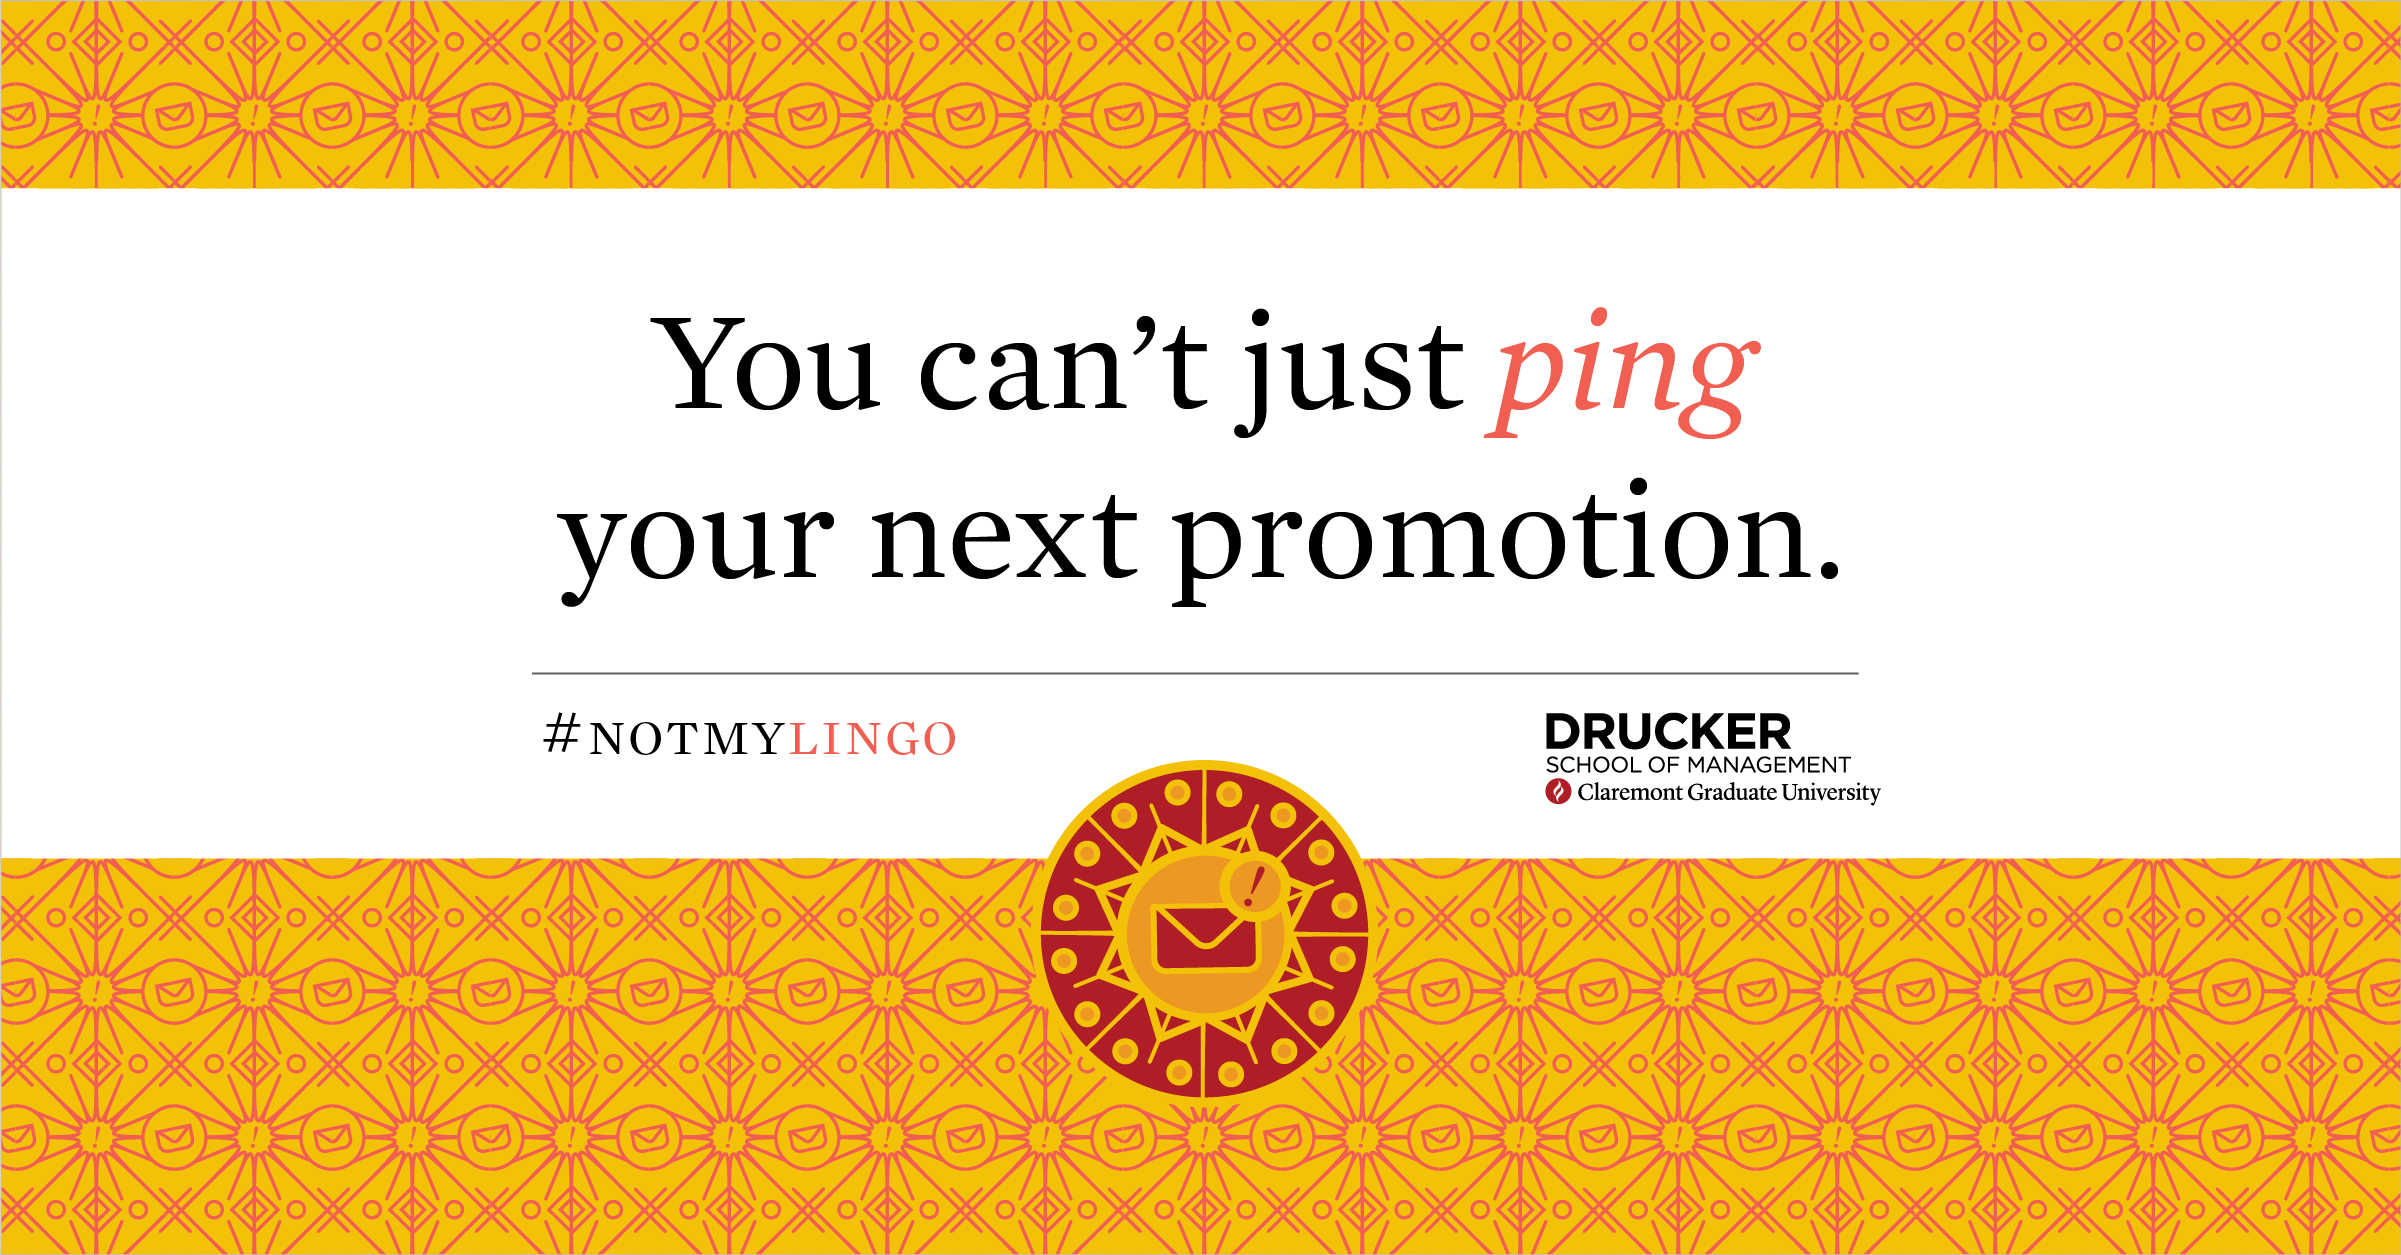 Drucker School of Management Ping Promotion Graphic designed by Kilter